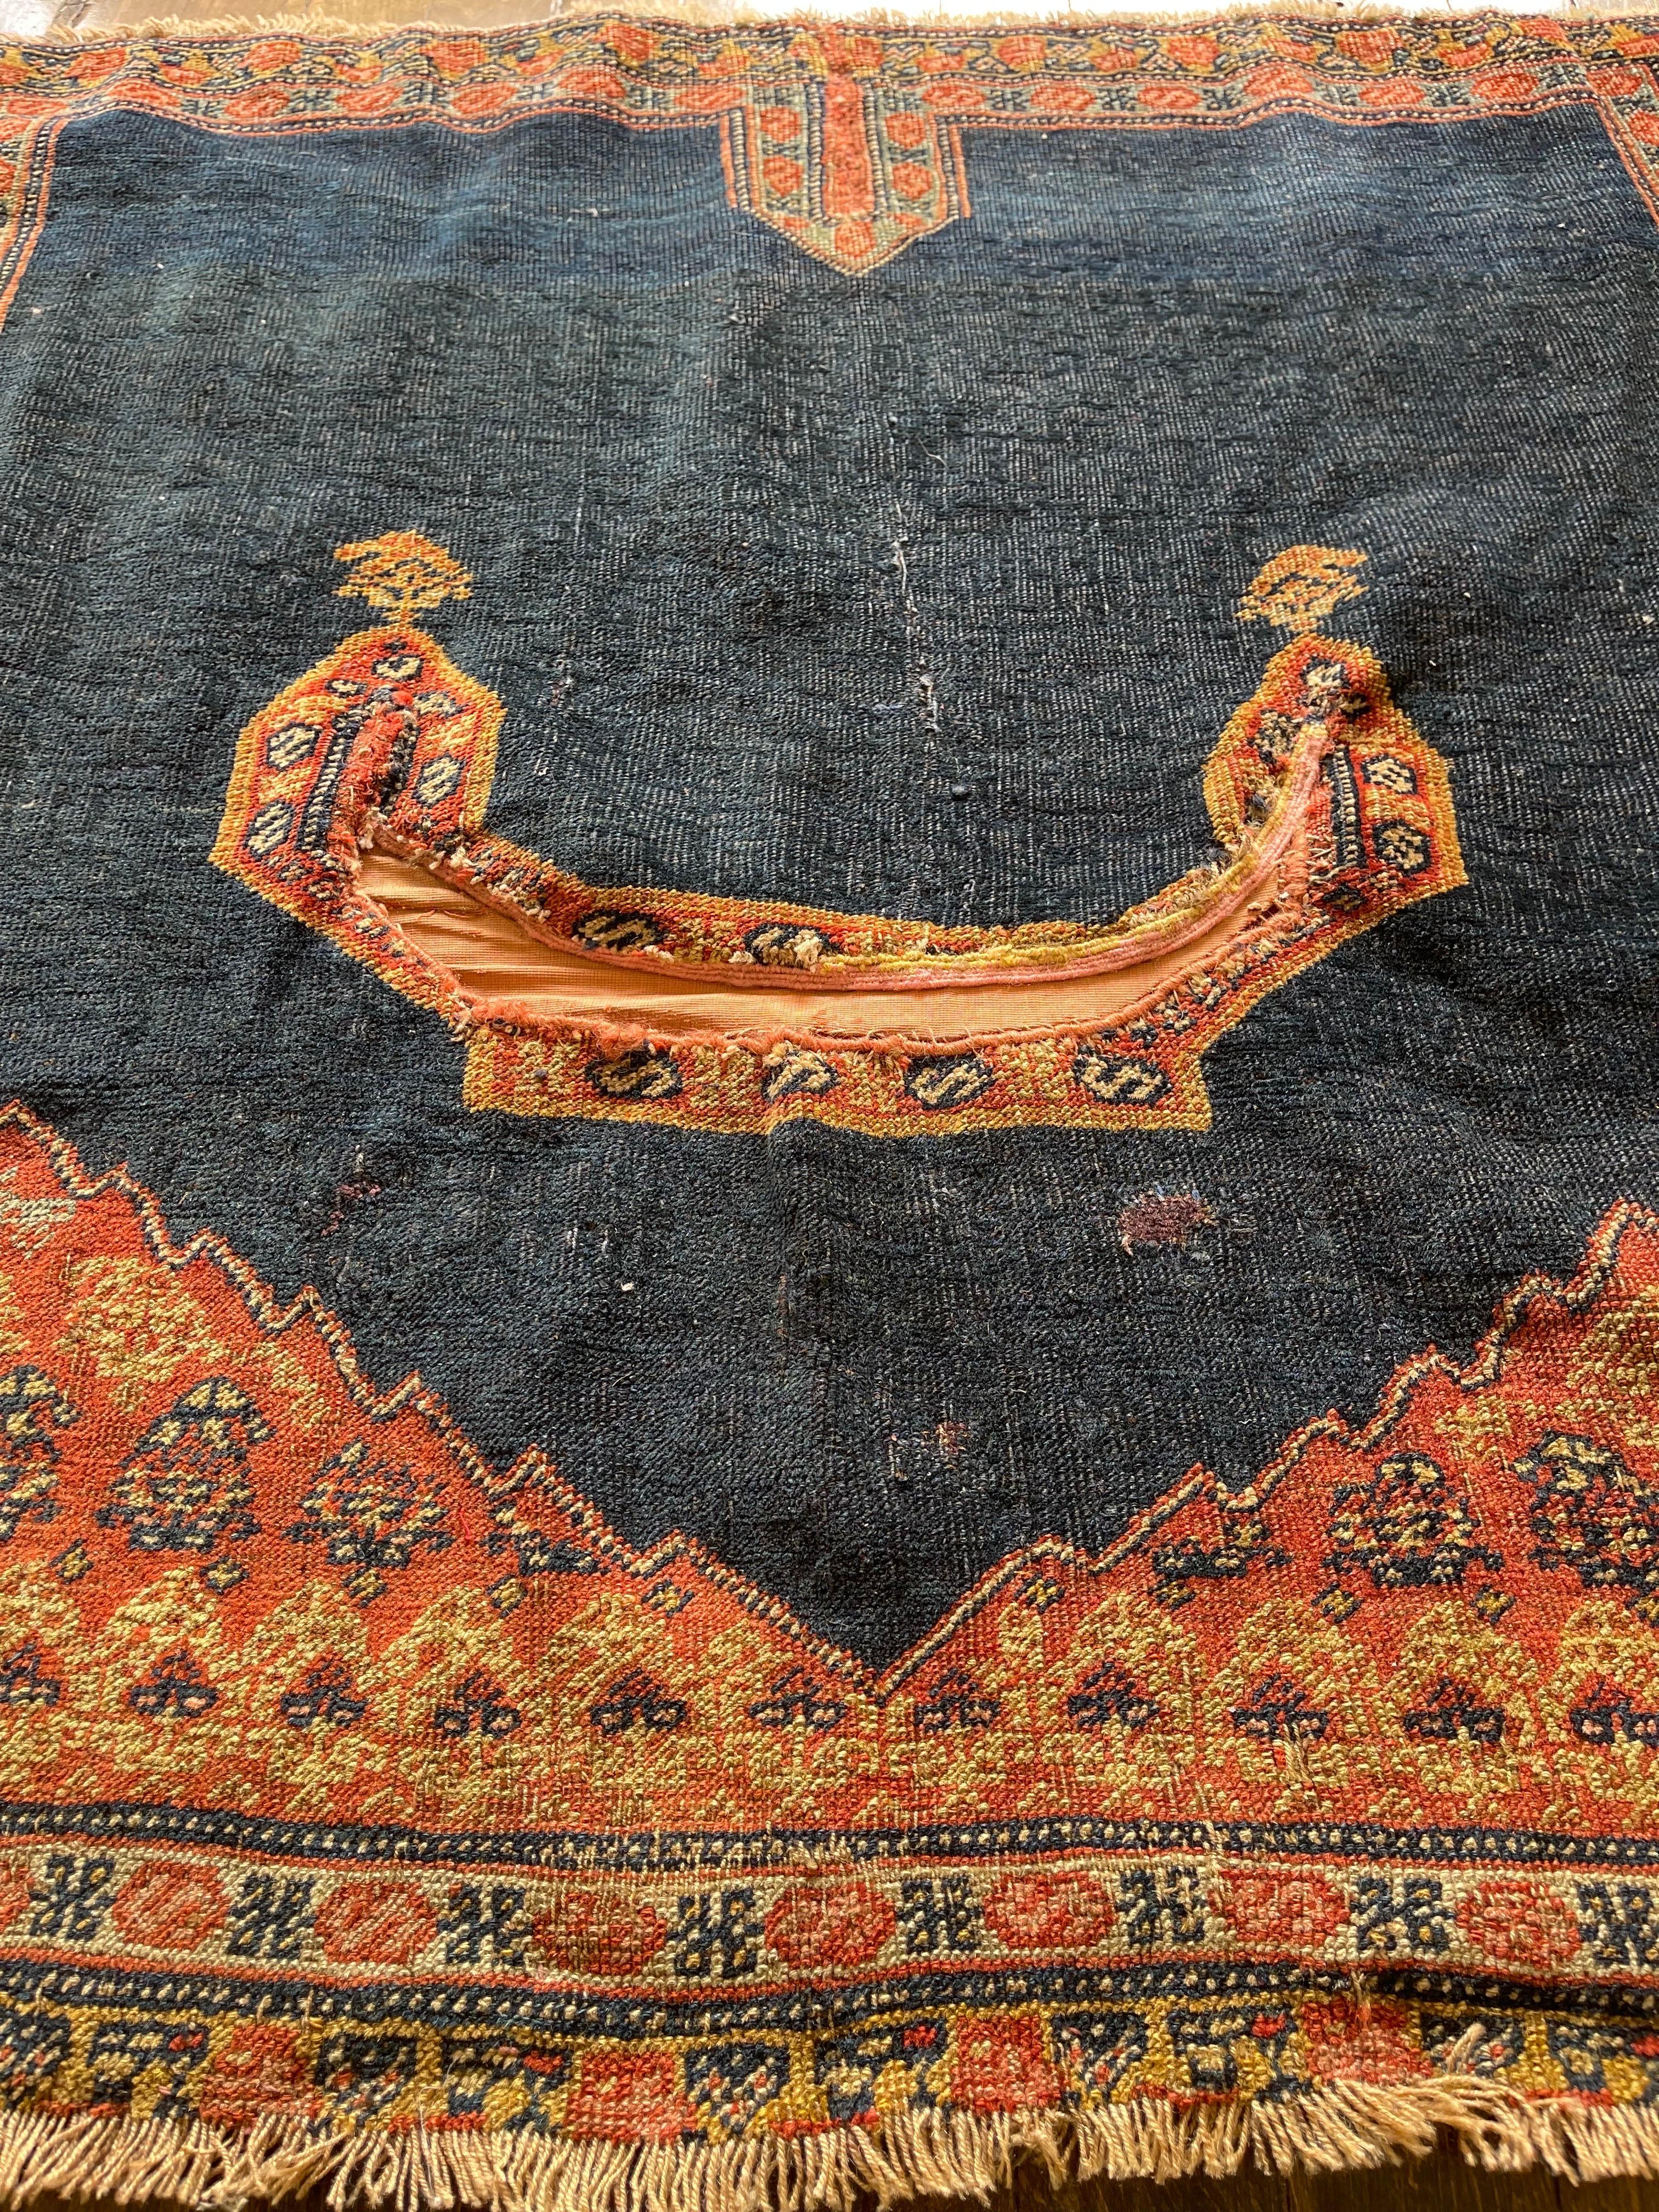 A beautiful and rare horse cover created in the town of Sanneh in Kurdistan region. The rug must have been woven by an artist/weaver as a gift to be taken to her home after she is married,a tribal tradition.The horse cover features a navy blue field